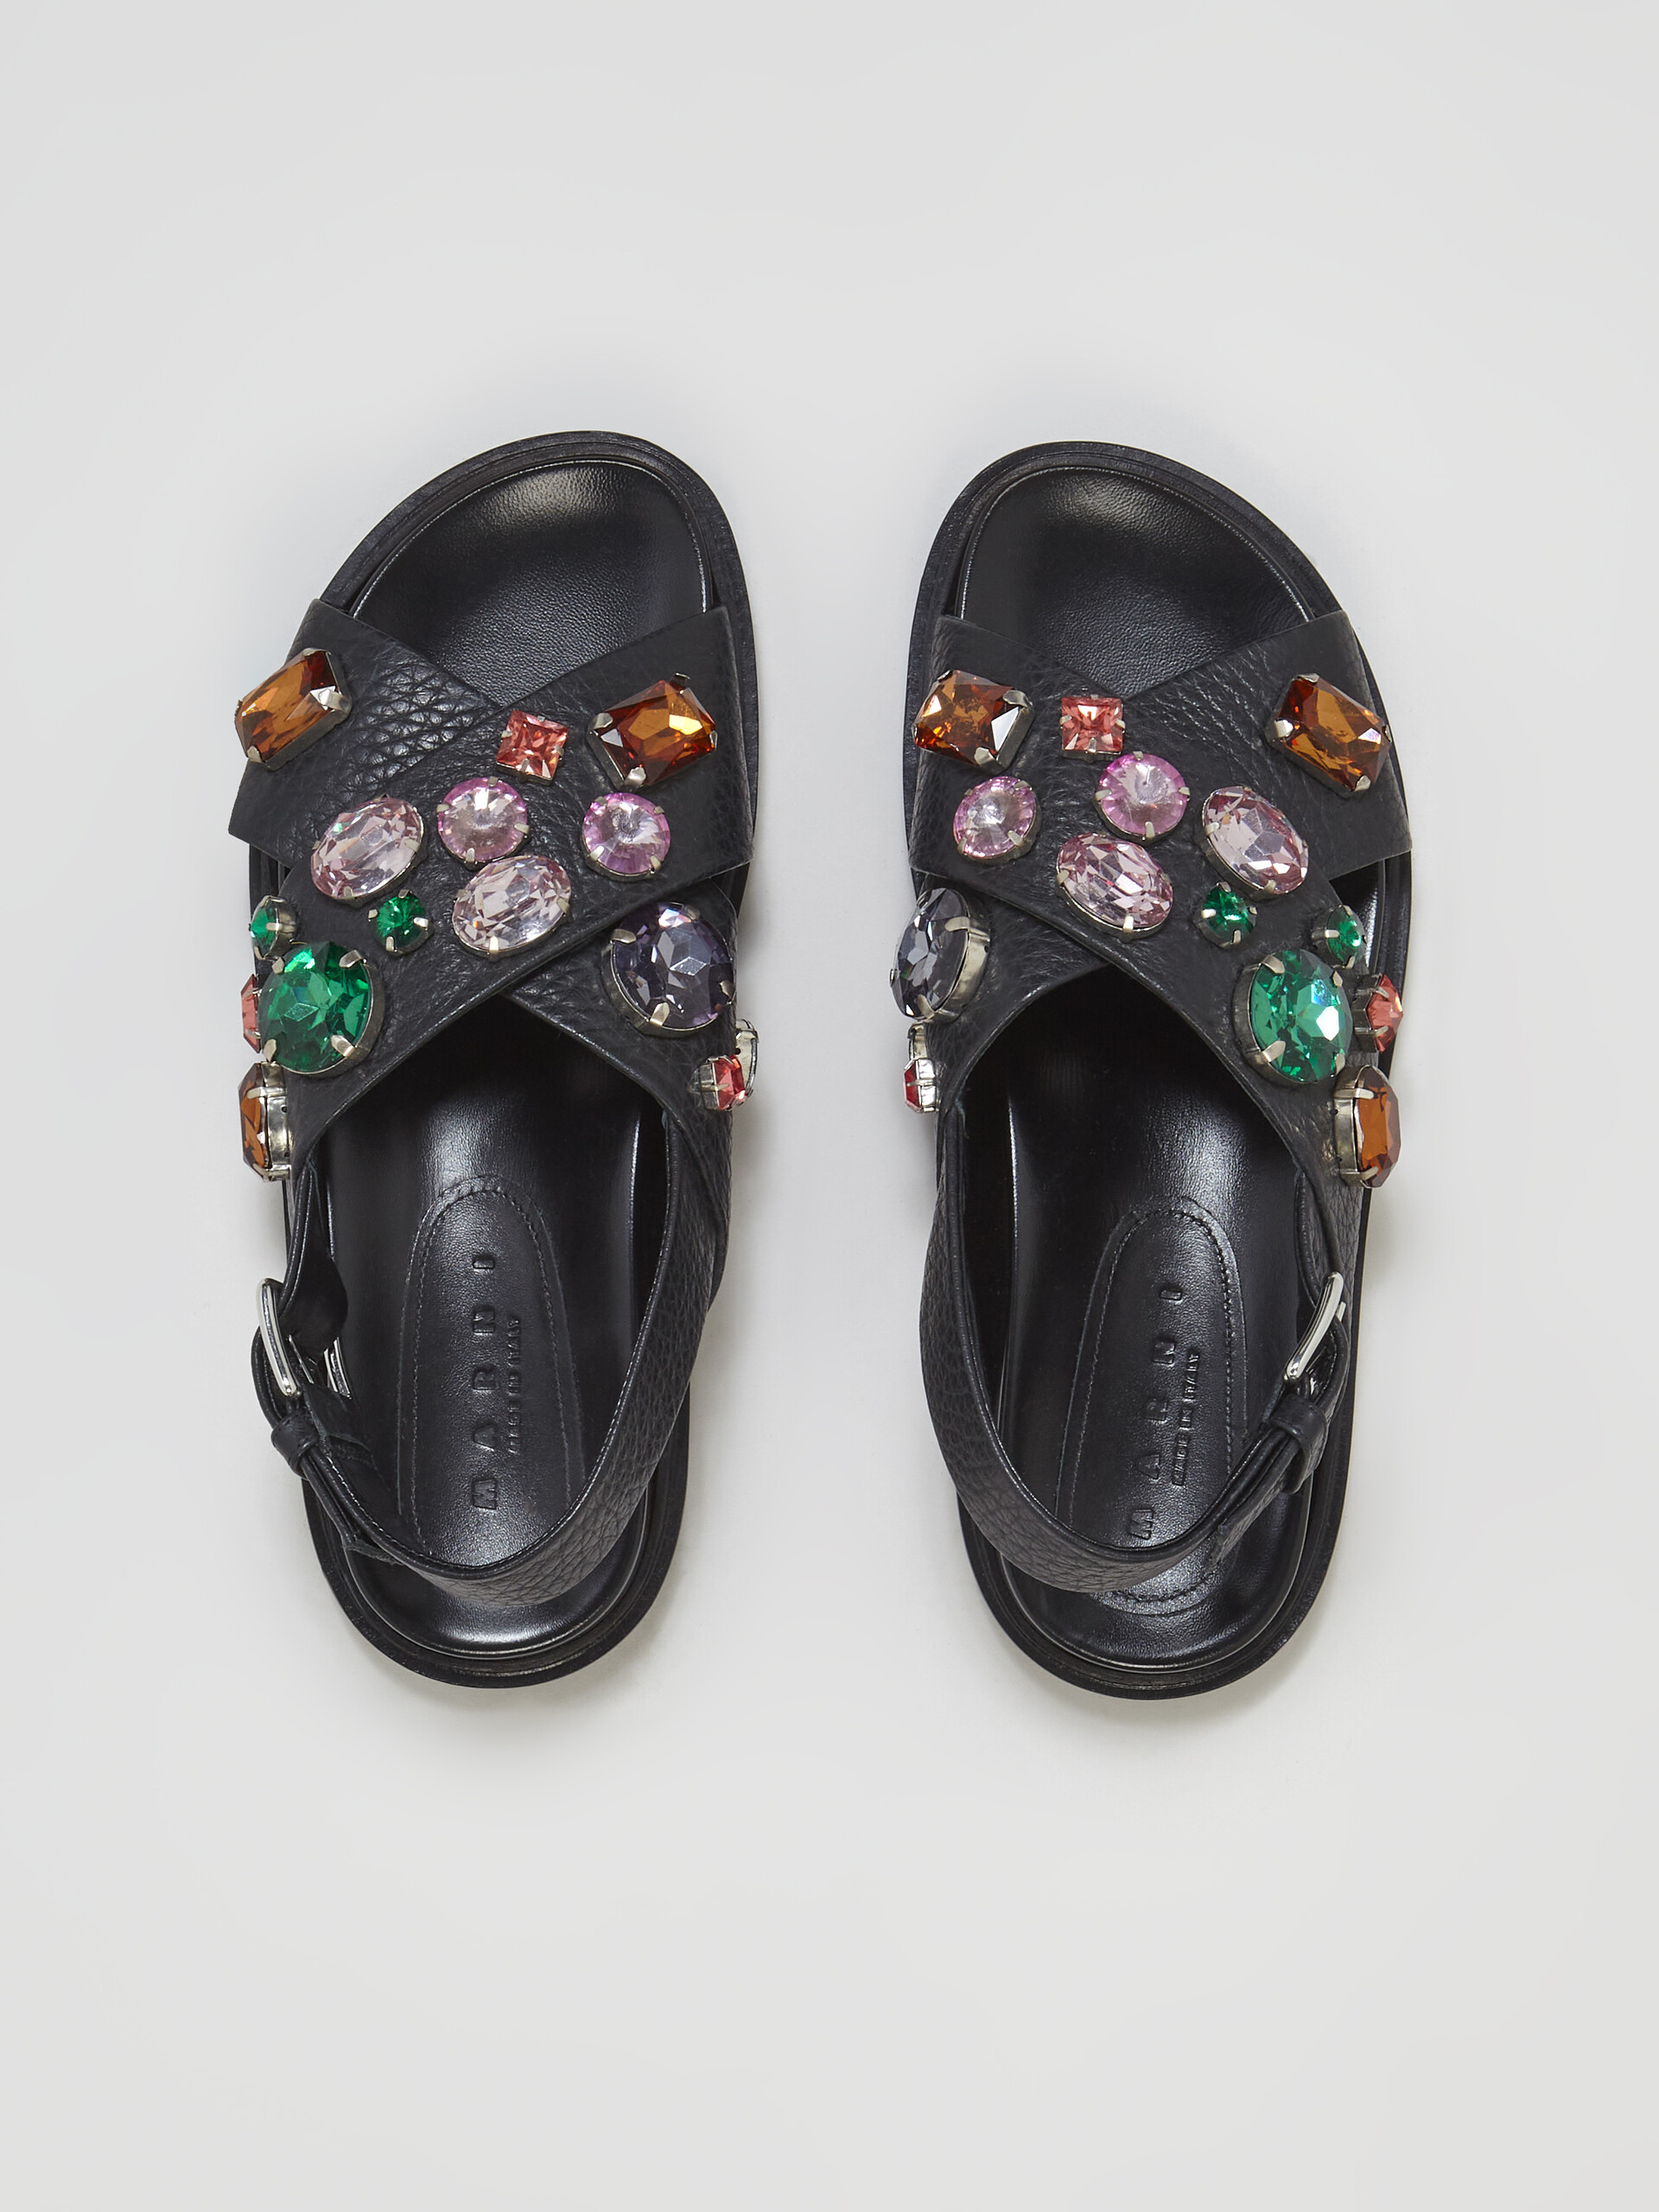 Glass beads grained leather fussbett - Sandals - Image 4